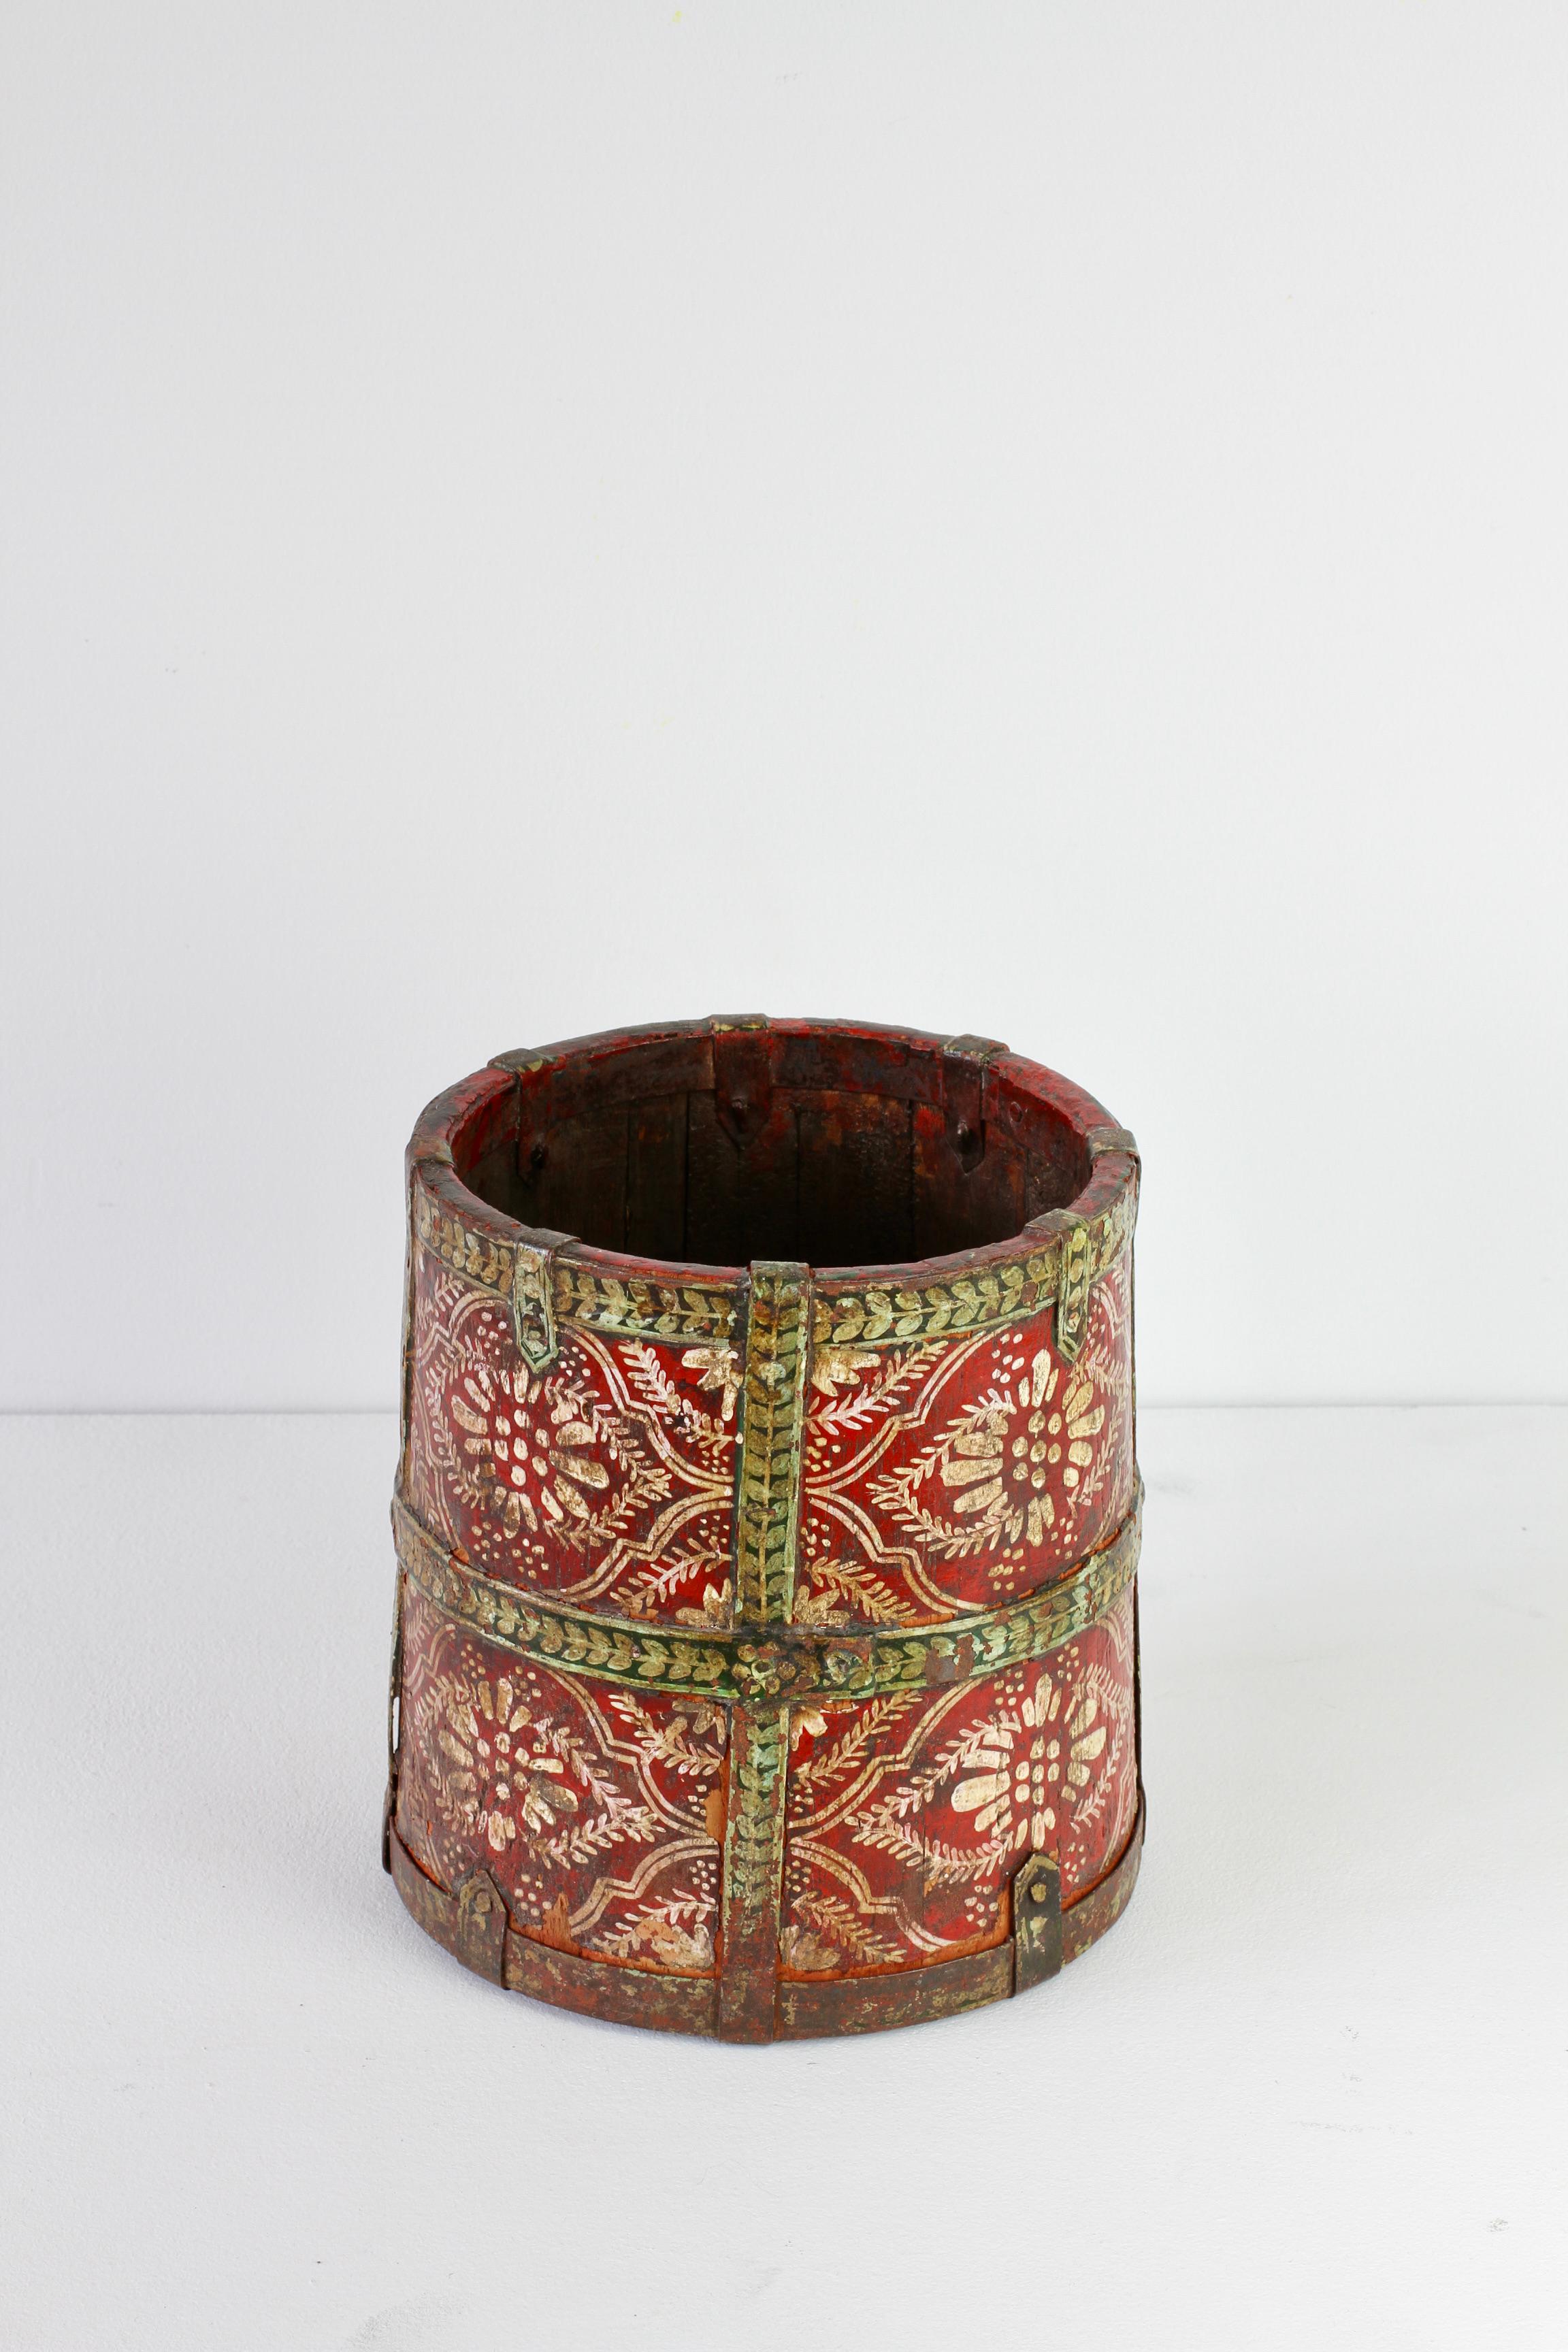 Hand Painted Antique Oak Staved Red Wooden Bucket circa 1850  9